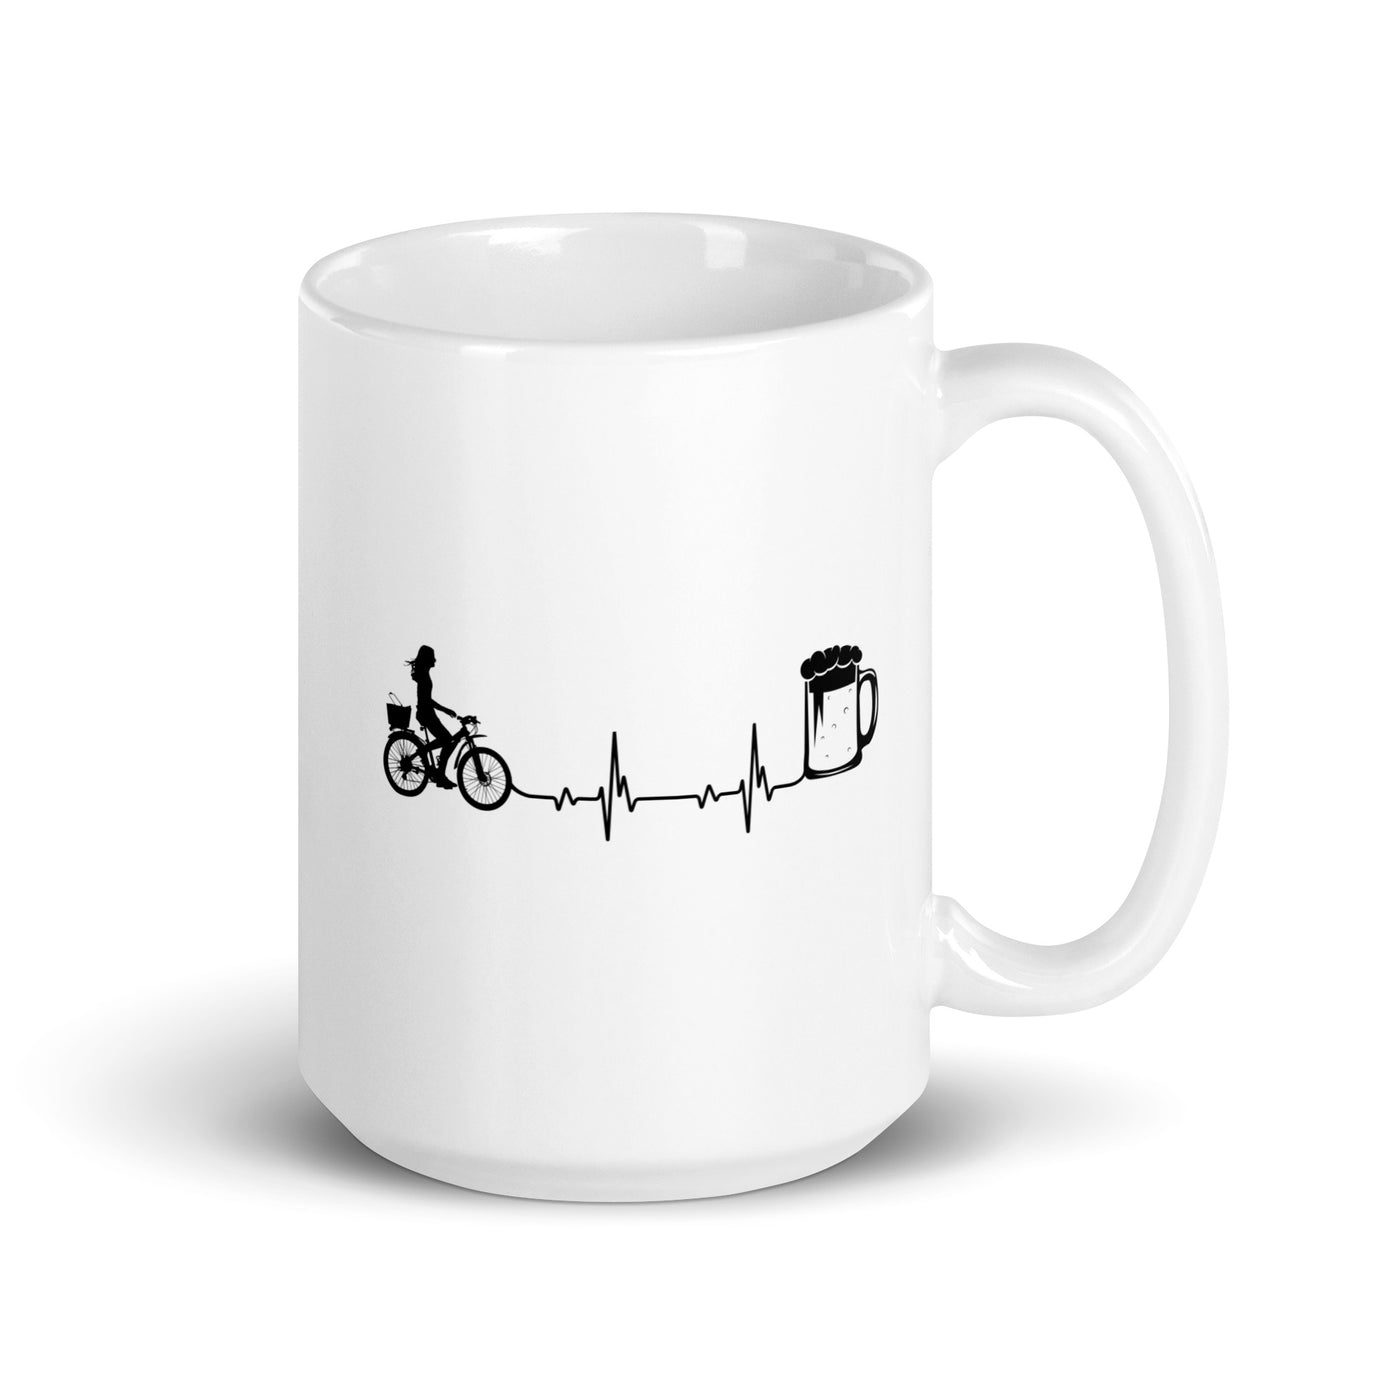 Heartbeat Beer And Cycling - Tasse fahrrad 15oz